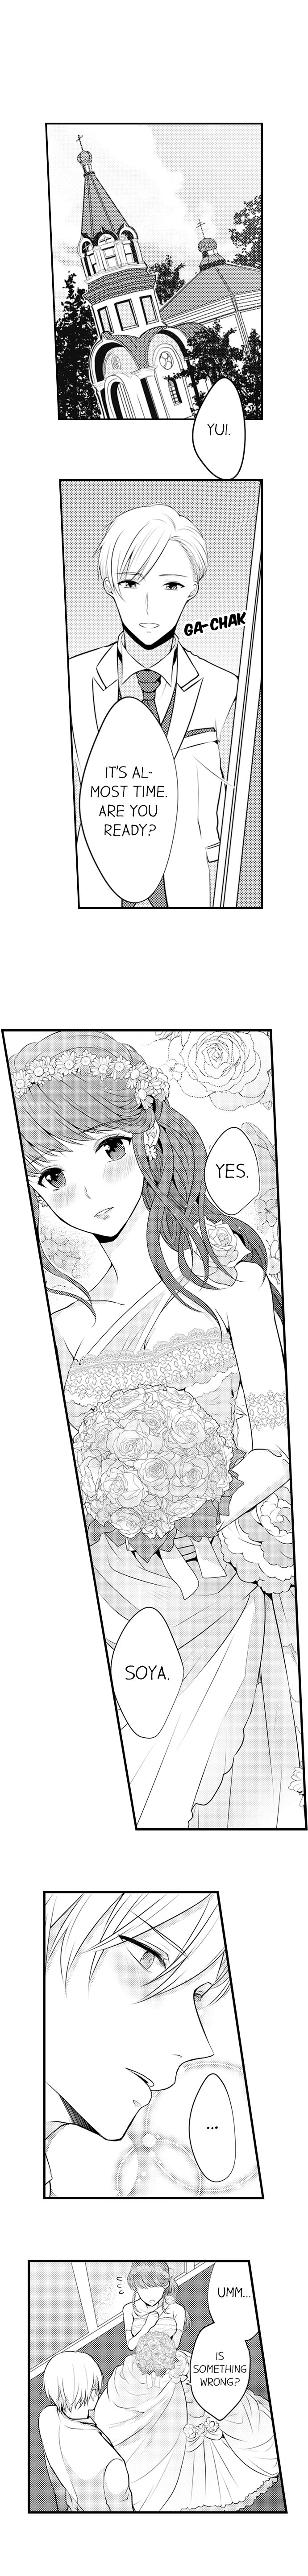 You're My Best Sex so Marry Me Ch.9